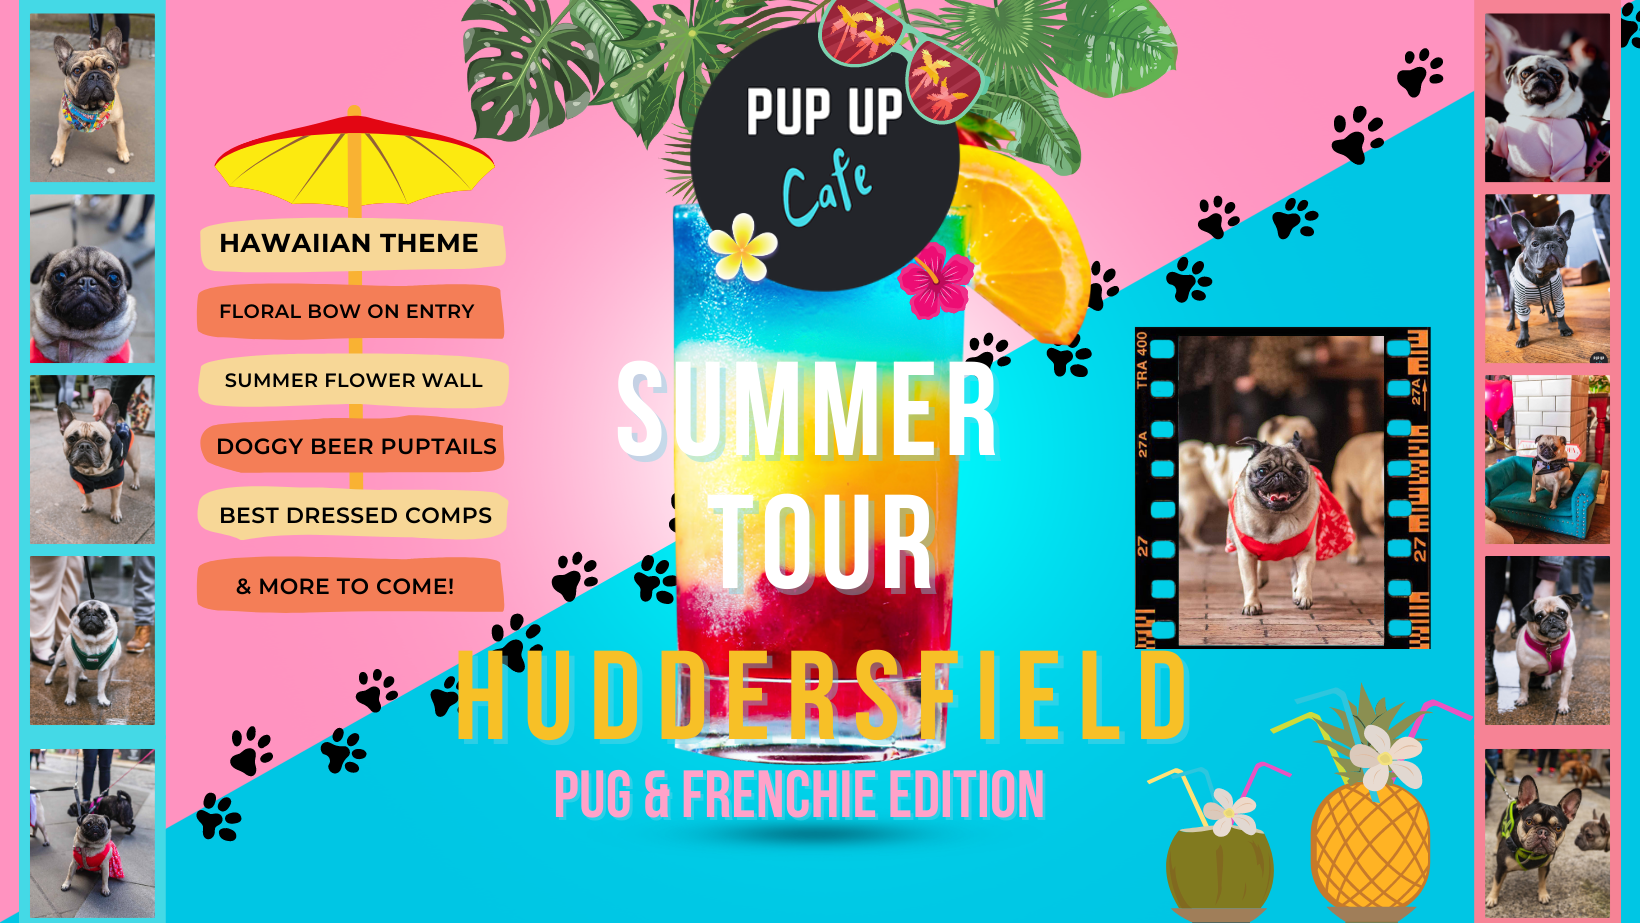 Pug/Frenchie Pup Up Cafe – Huddersfield | SUMMER TOUR! 🌞